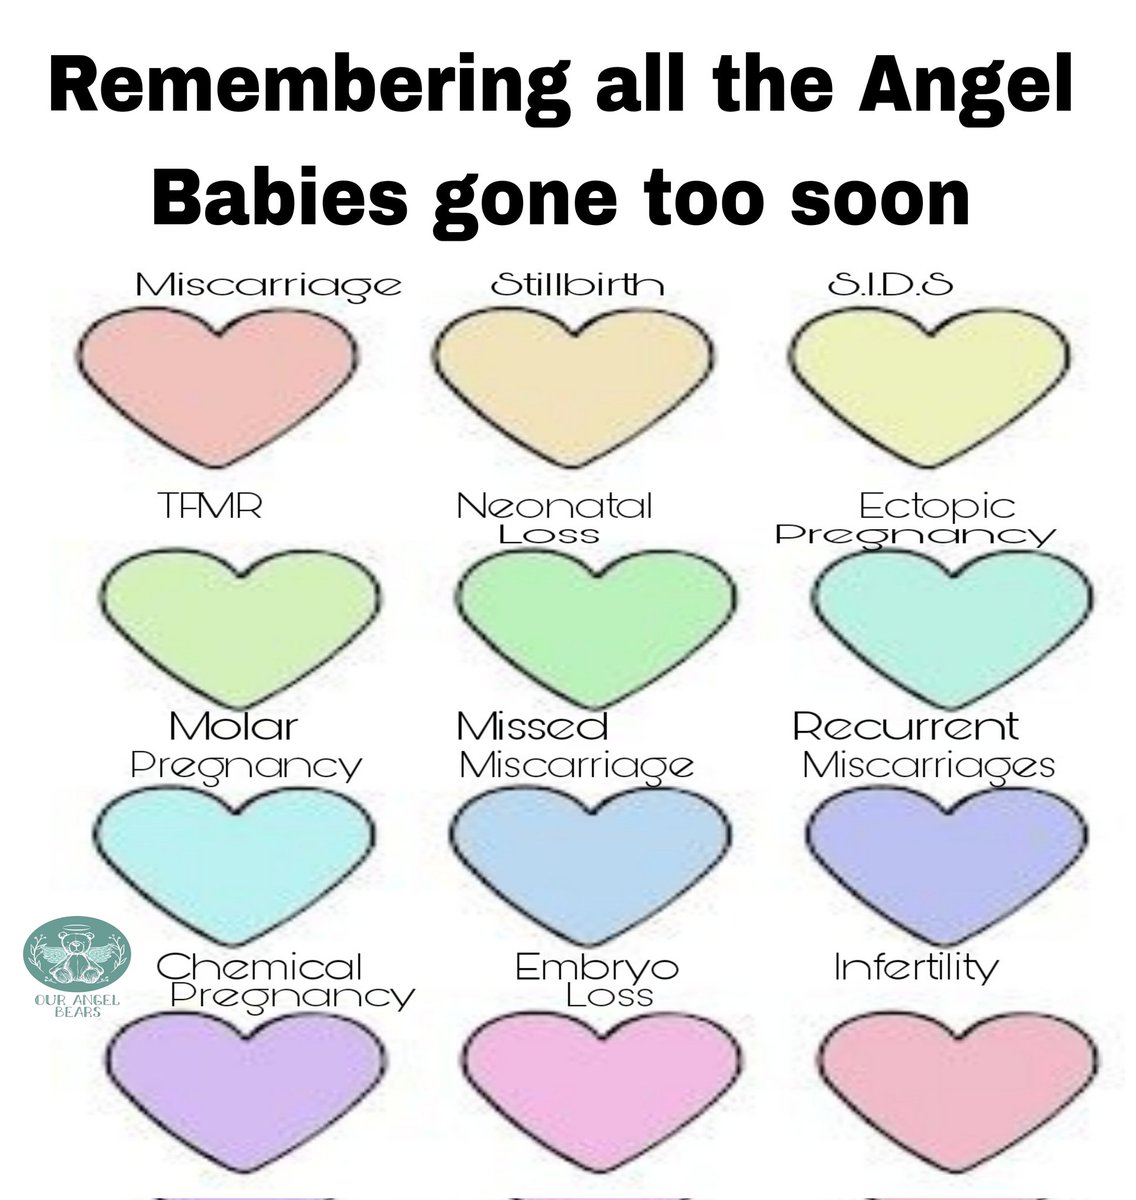 We will remember all your precious Angels with you #BabylossAwareness #AllBabiesMatter #BabylossCommunity #Miscarriage #Stillbirth #Sids #tfmr #neonatalloss #ectopicpregnancy #molarpregnancy #missedmiscarriage #chemicalpregnancy #recurrentmiscarriages #embryoloss #infertility 💔